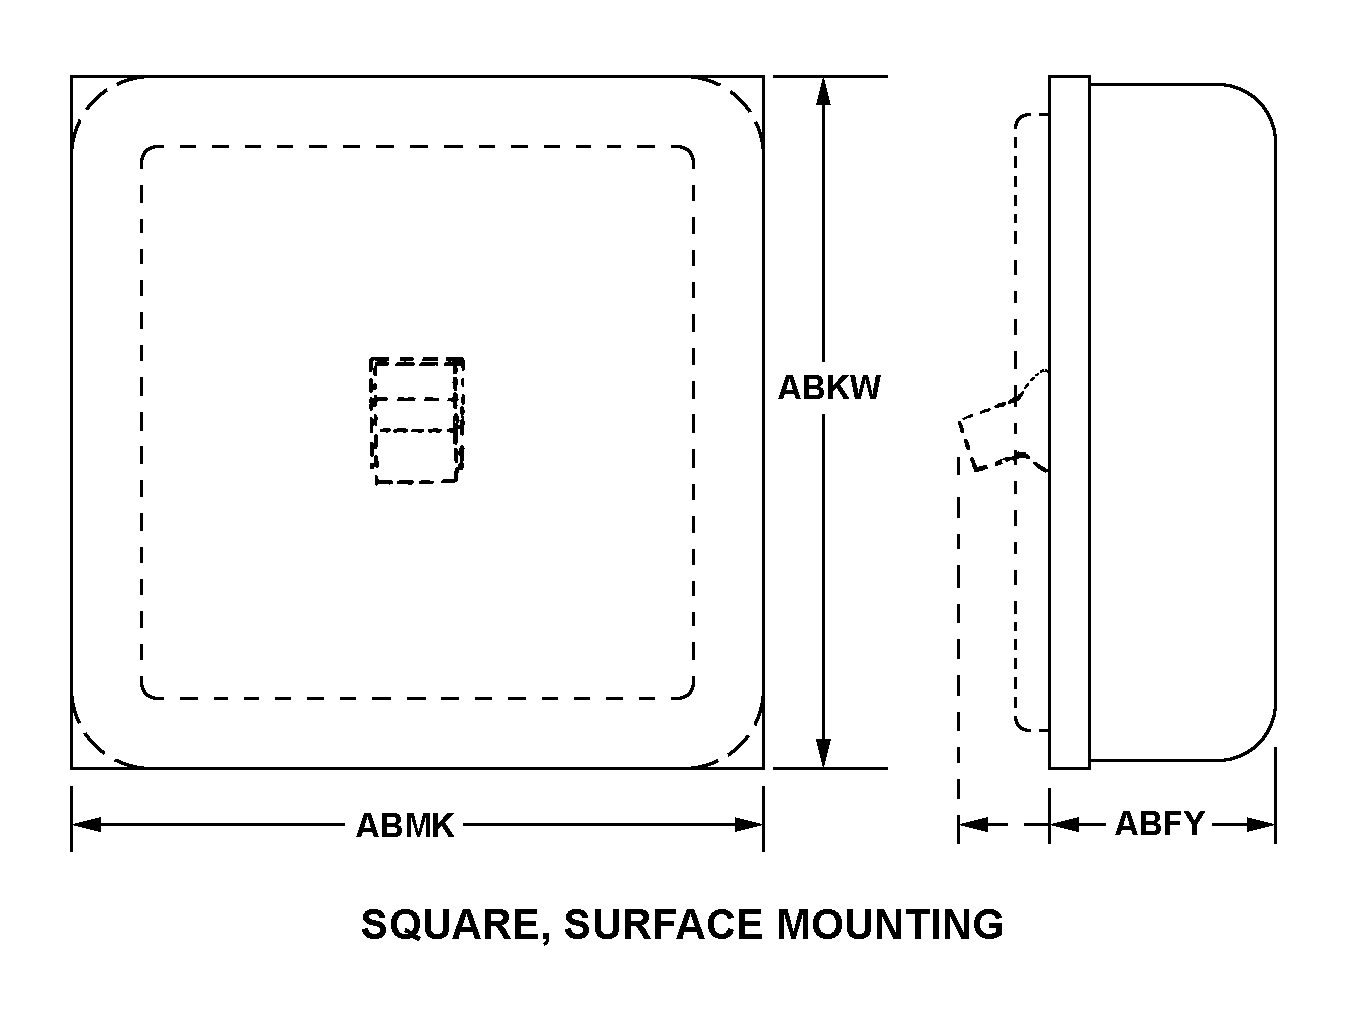 SQUARE, SURFACE MOUNTING style nsn 5930-01-558-5531